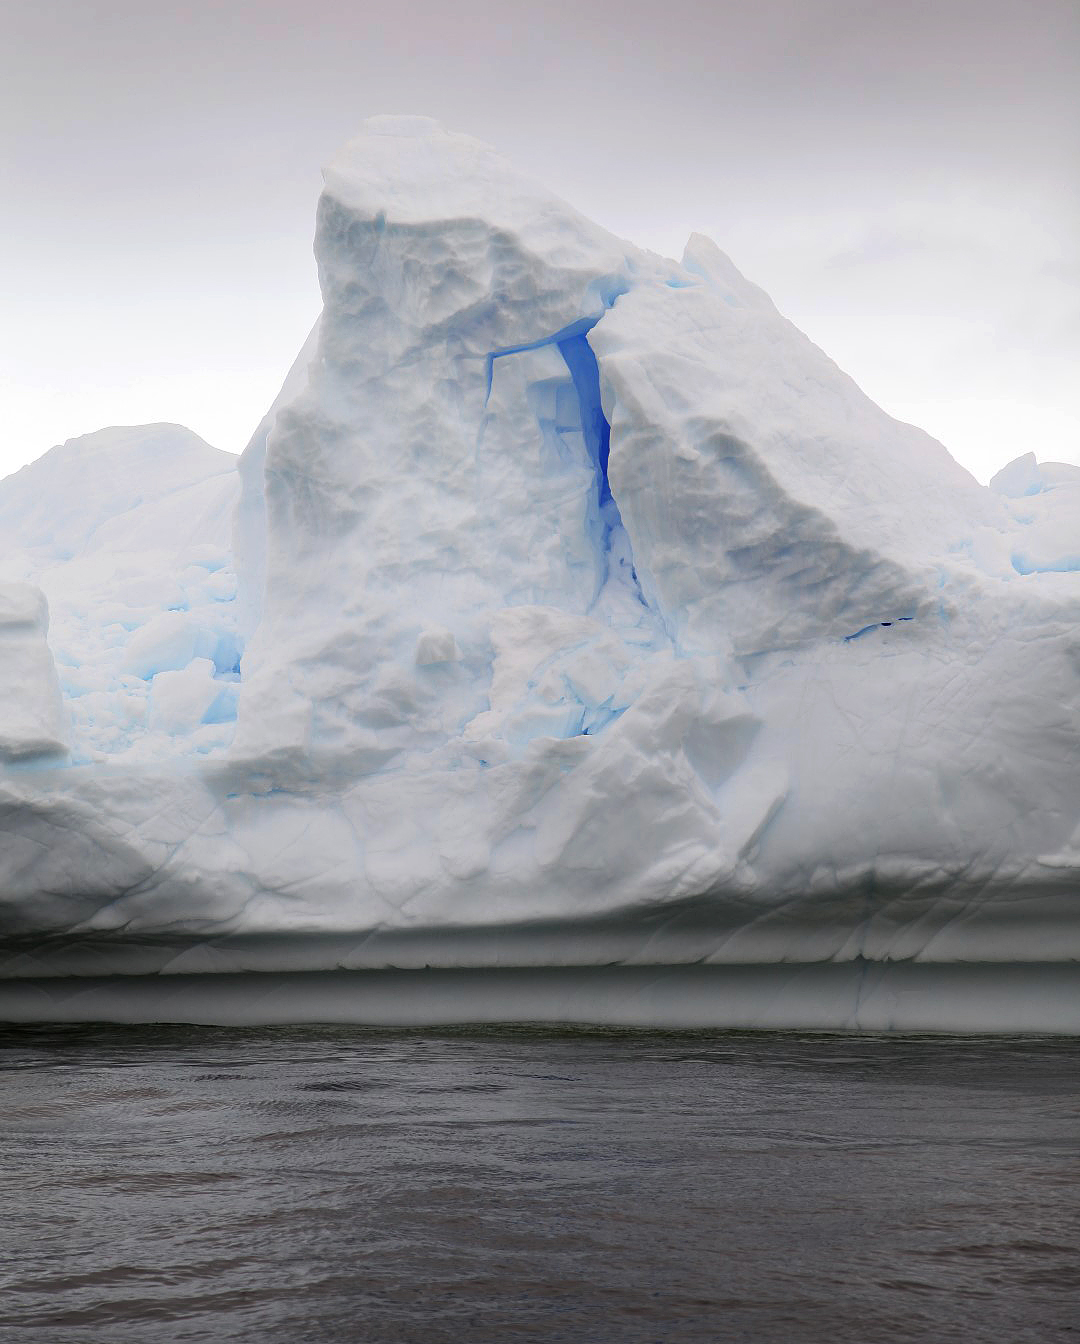 A bright, brillant blue glows from within an Antarctic iceberg